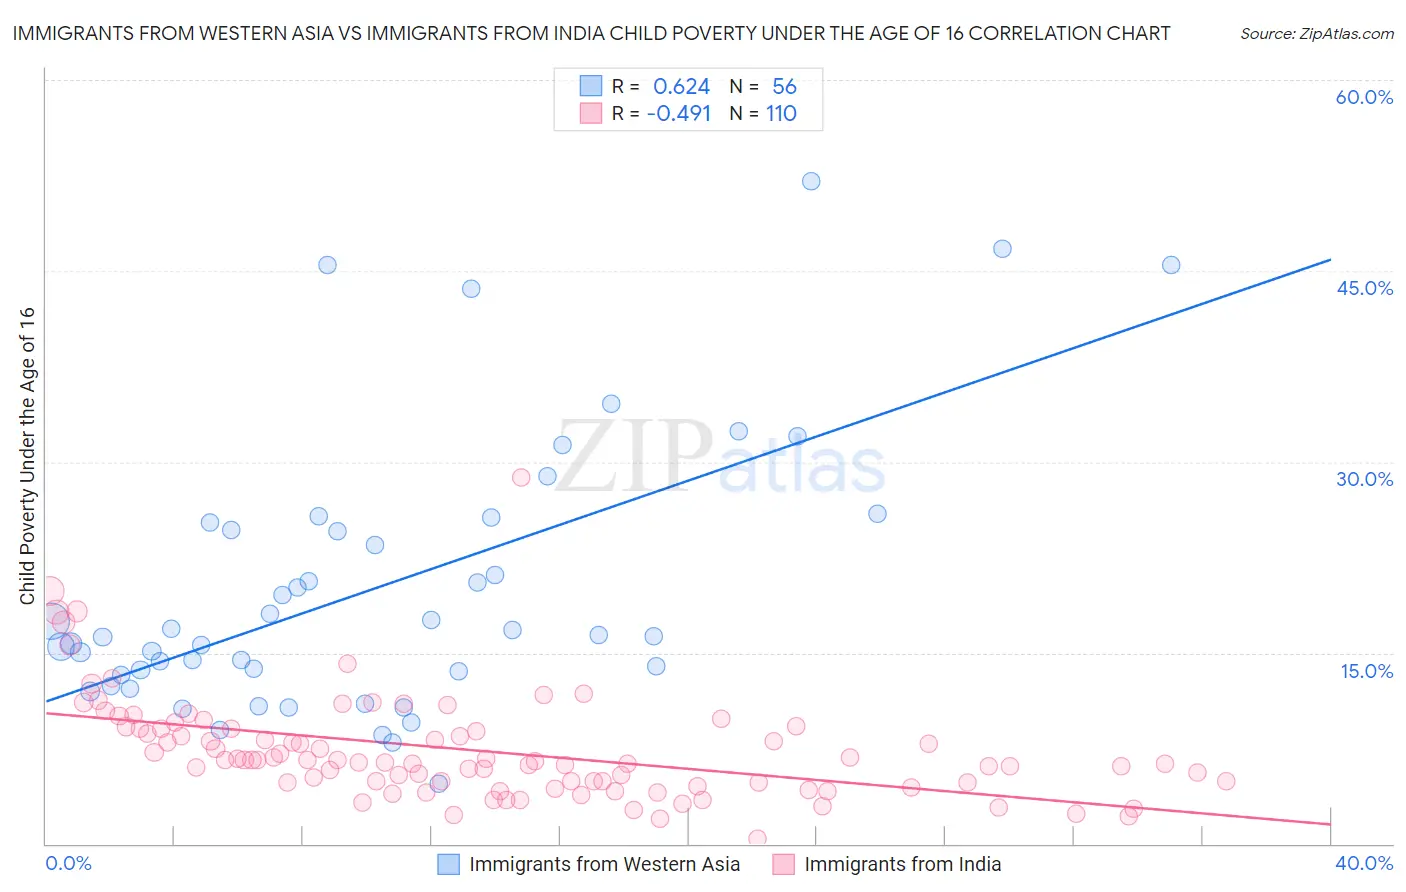 Immigrants from Western Asia vs Immigrants from India Child Poverty Under the Age of 16